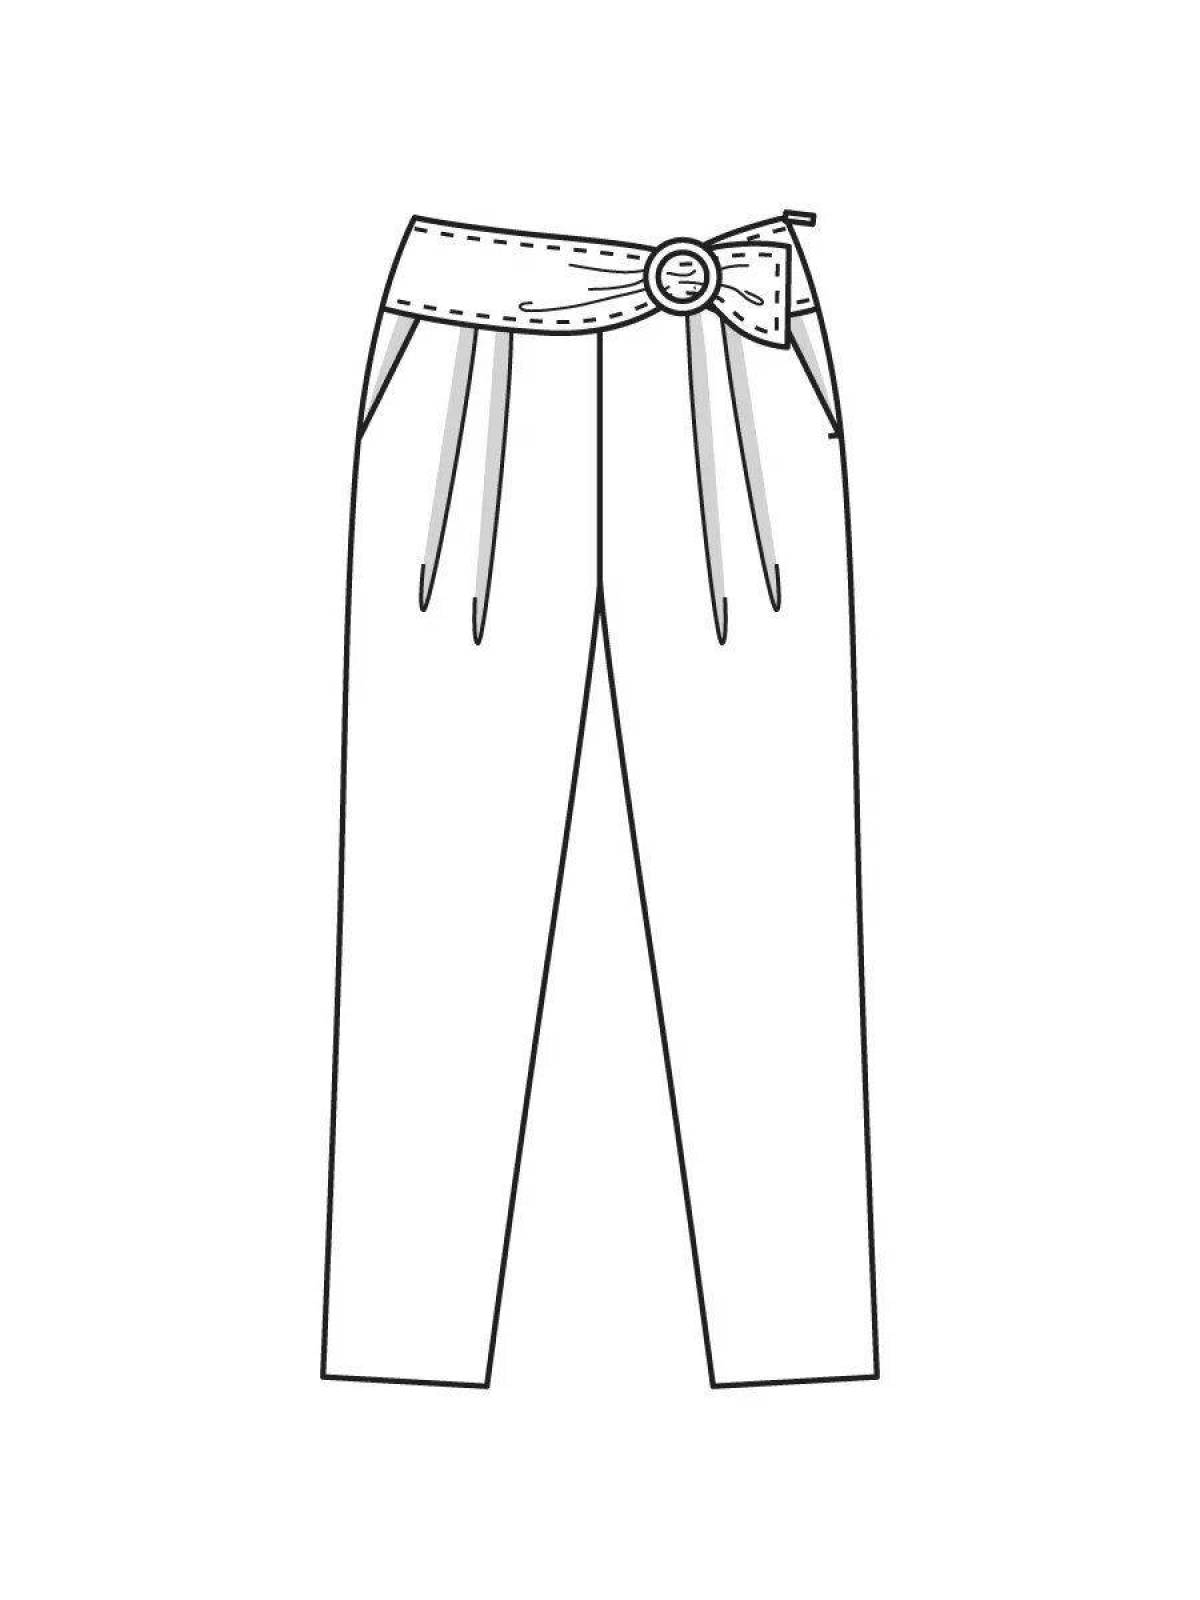 Cute pants coloring page for 3-4 year olds